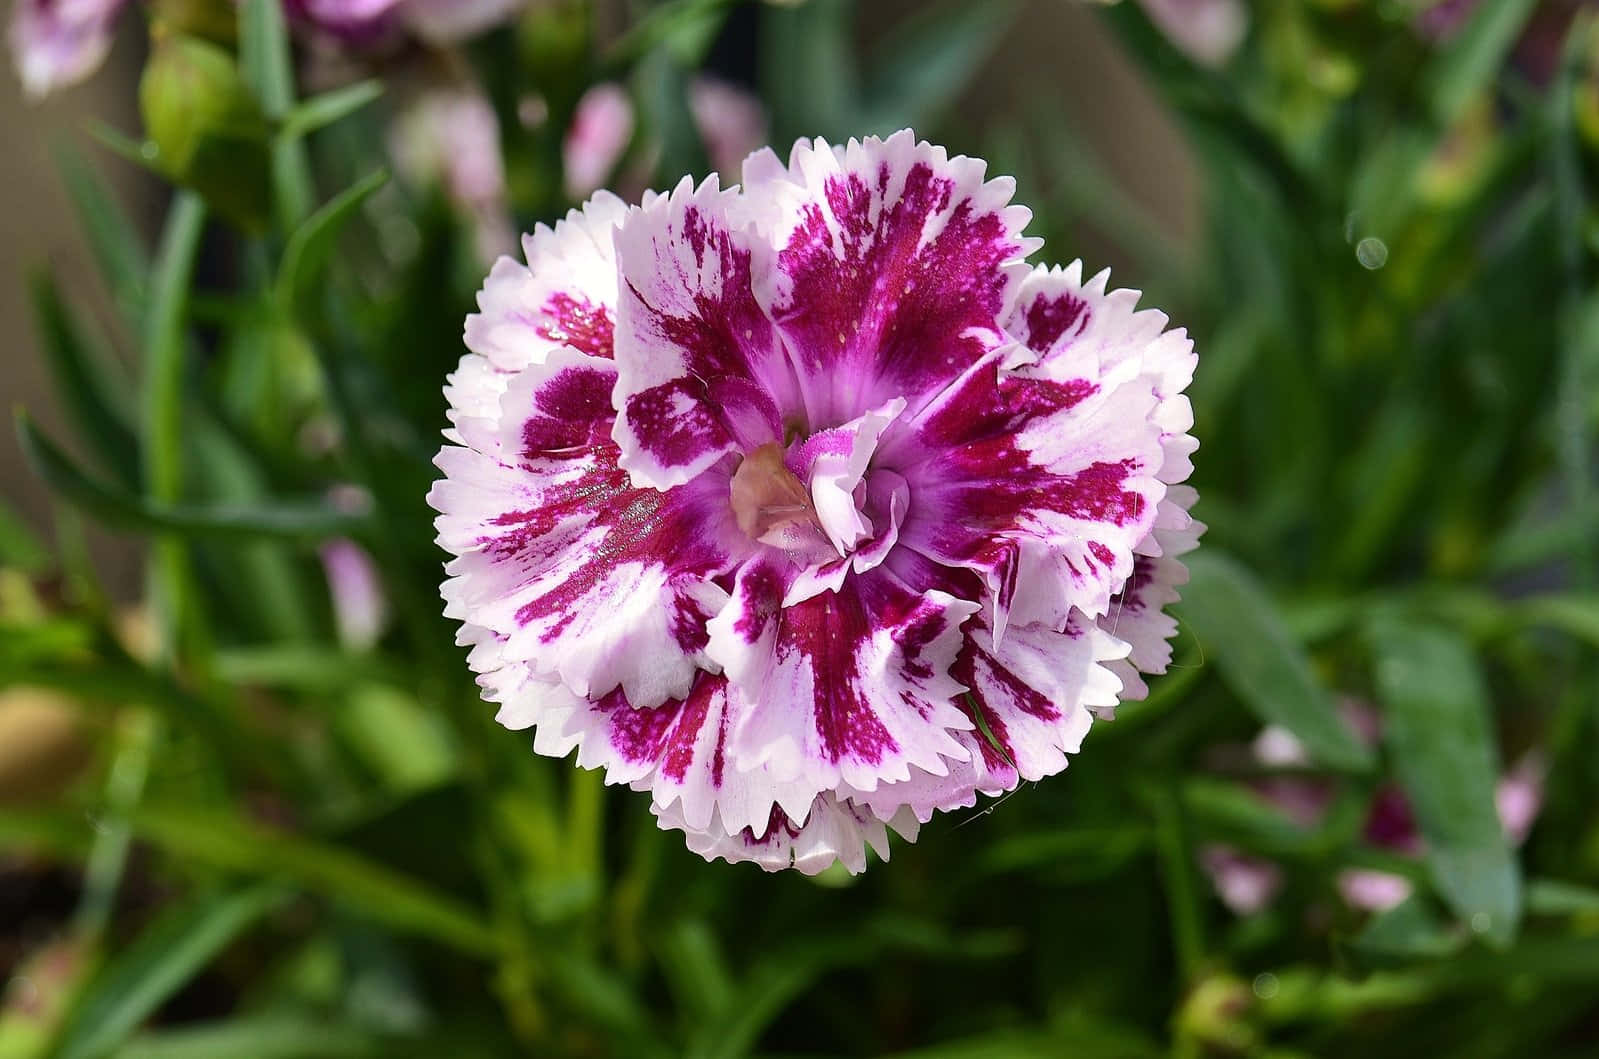 A Purple And White Carnation Flower Is Growing In A Pot